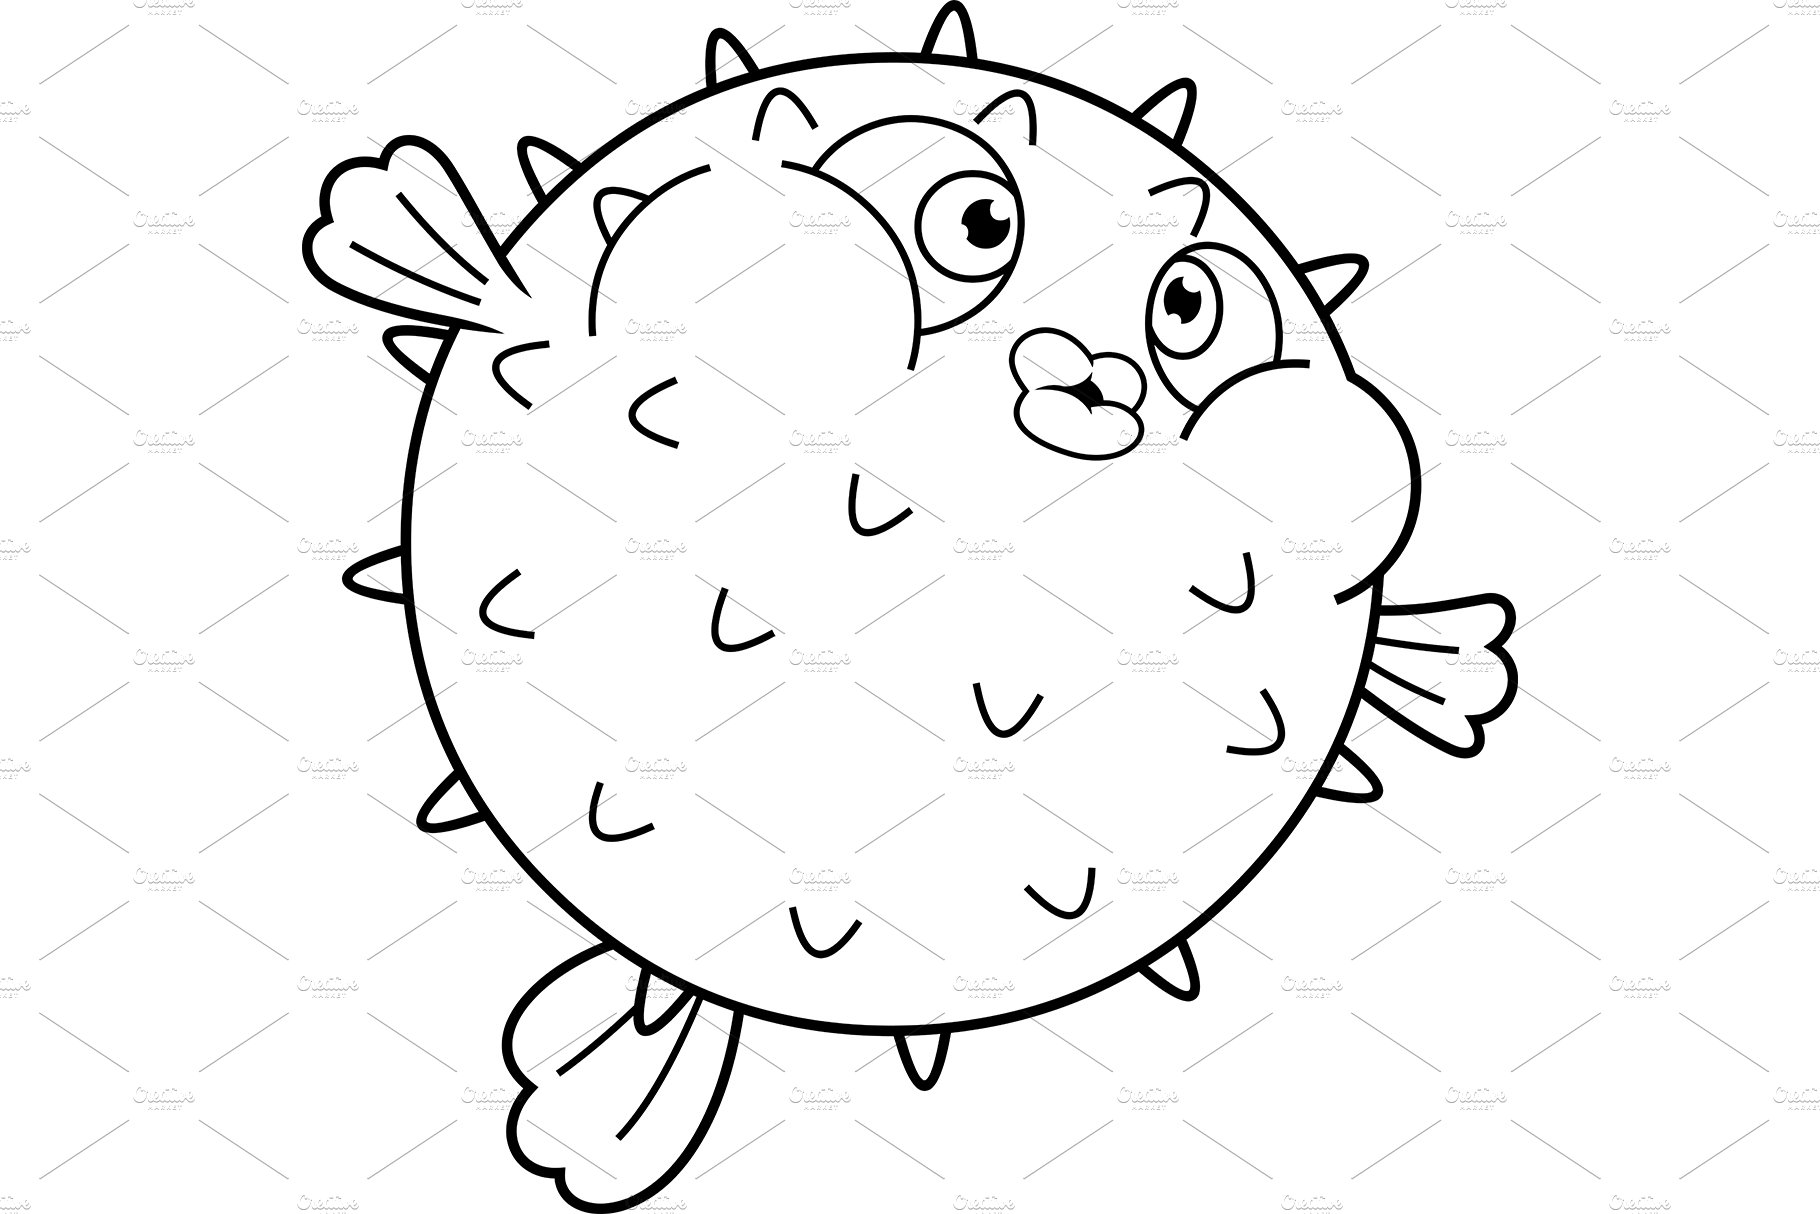 Outlined Cute Puffer Fish cover image.